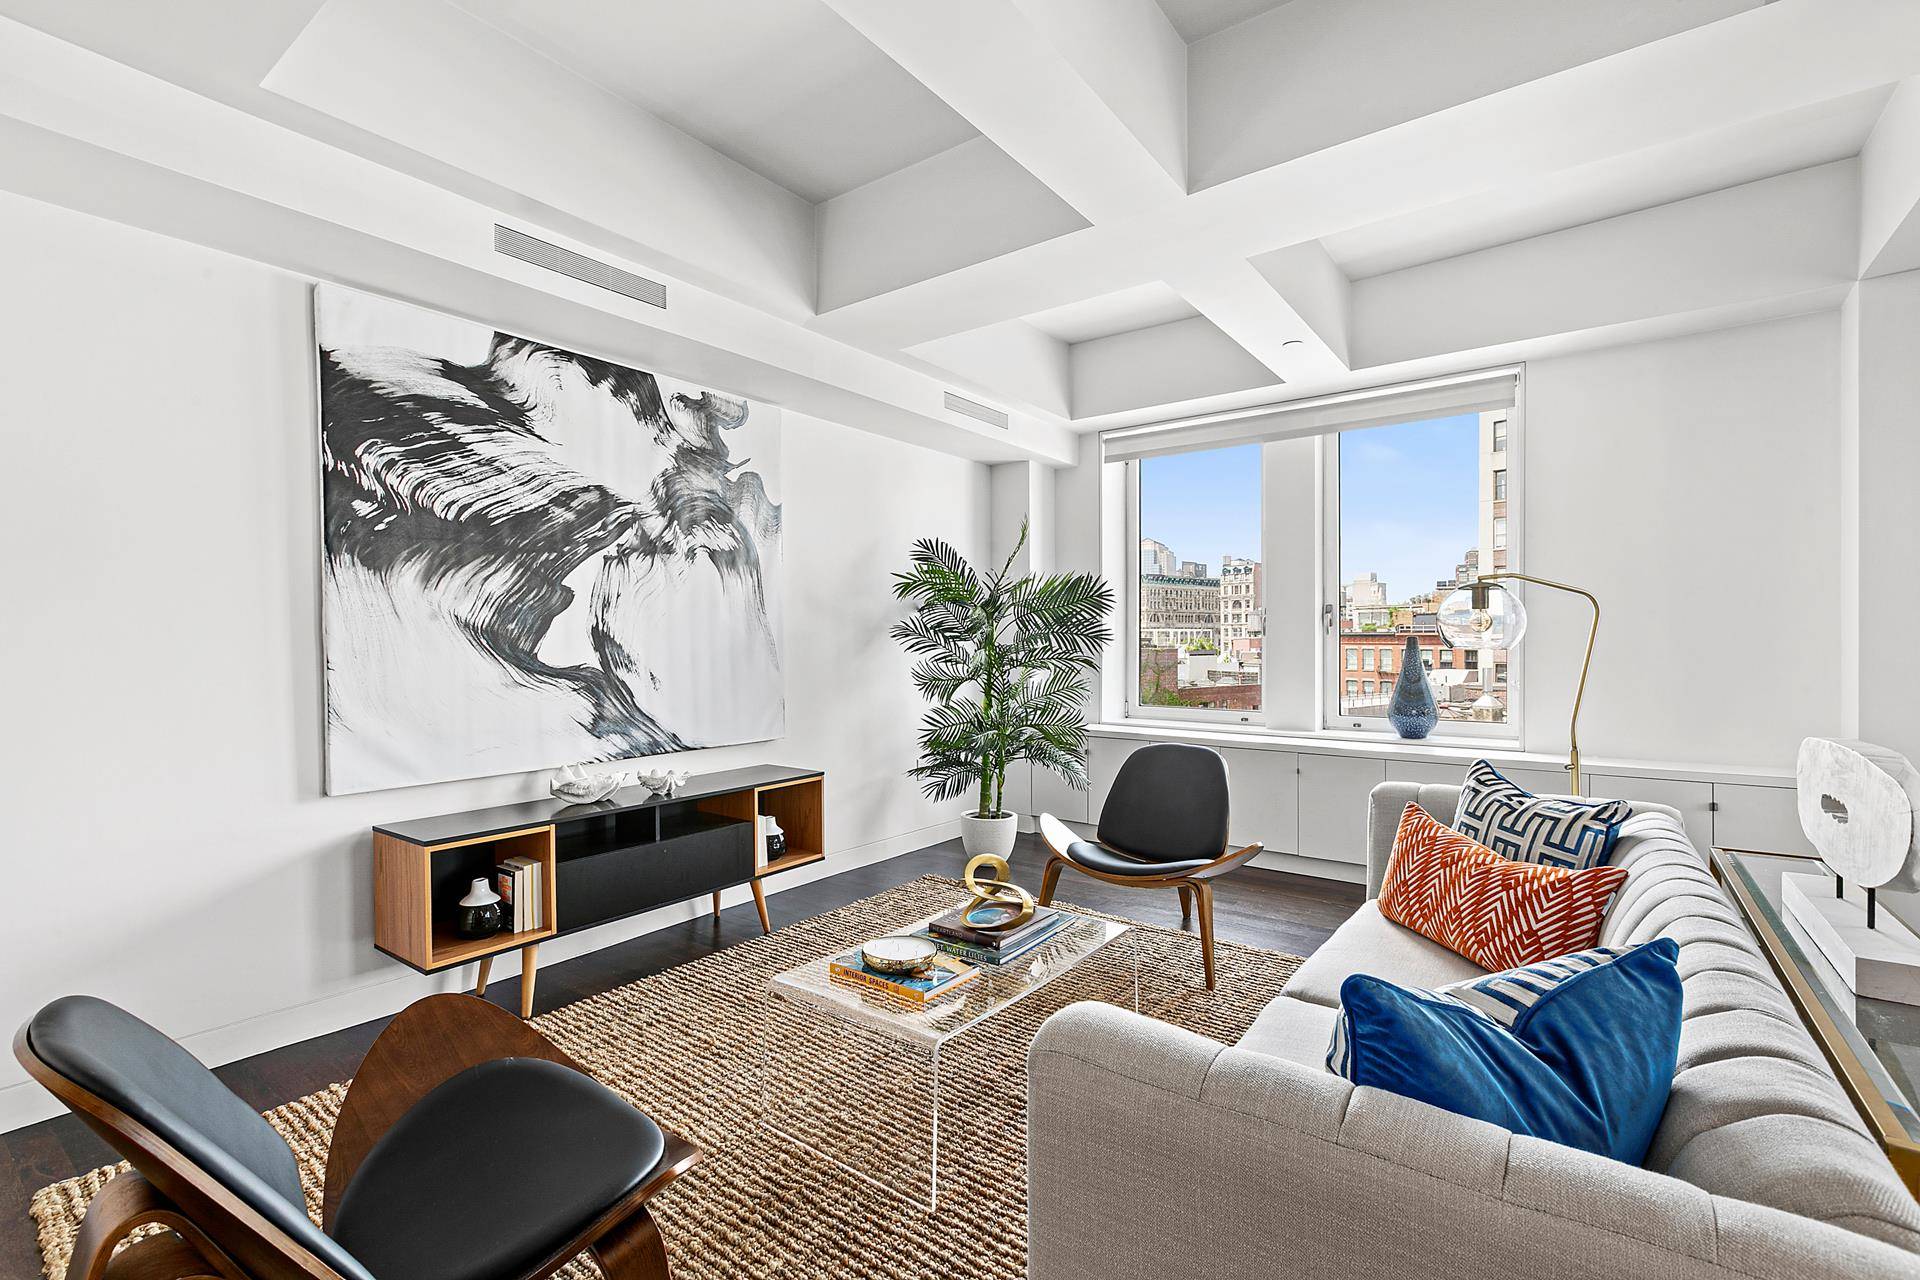 Truly spectacular two bedroom condominium high above SoHo with twenty four hour doorman, two full baths, one powder room, central air conditioning and private washer amp ; dryer.